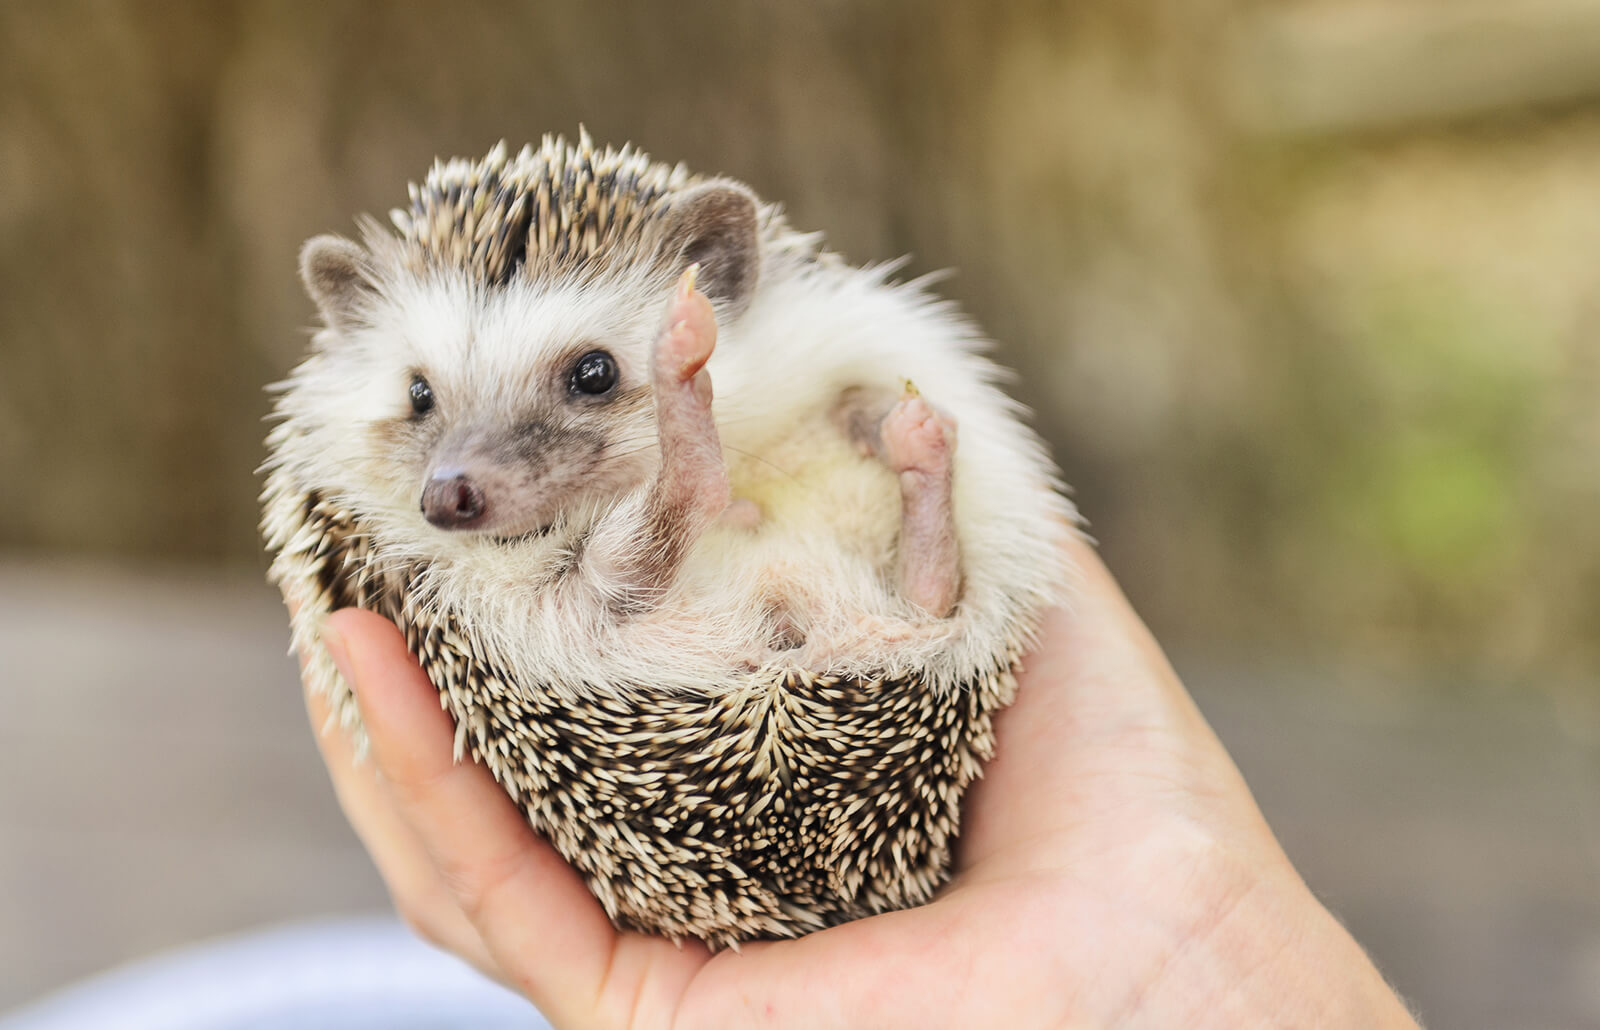 Are hedgehogs friendly?